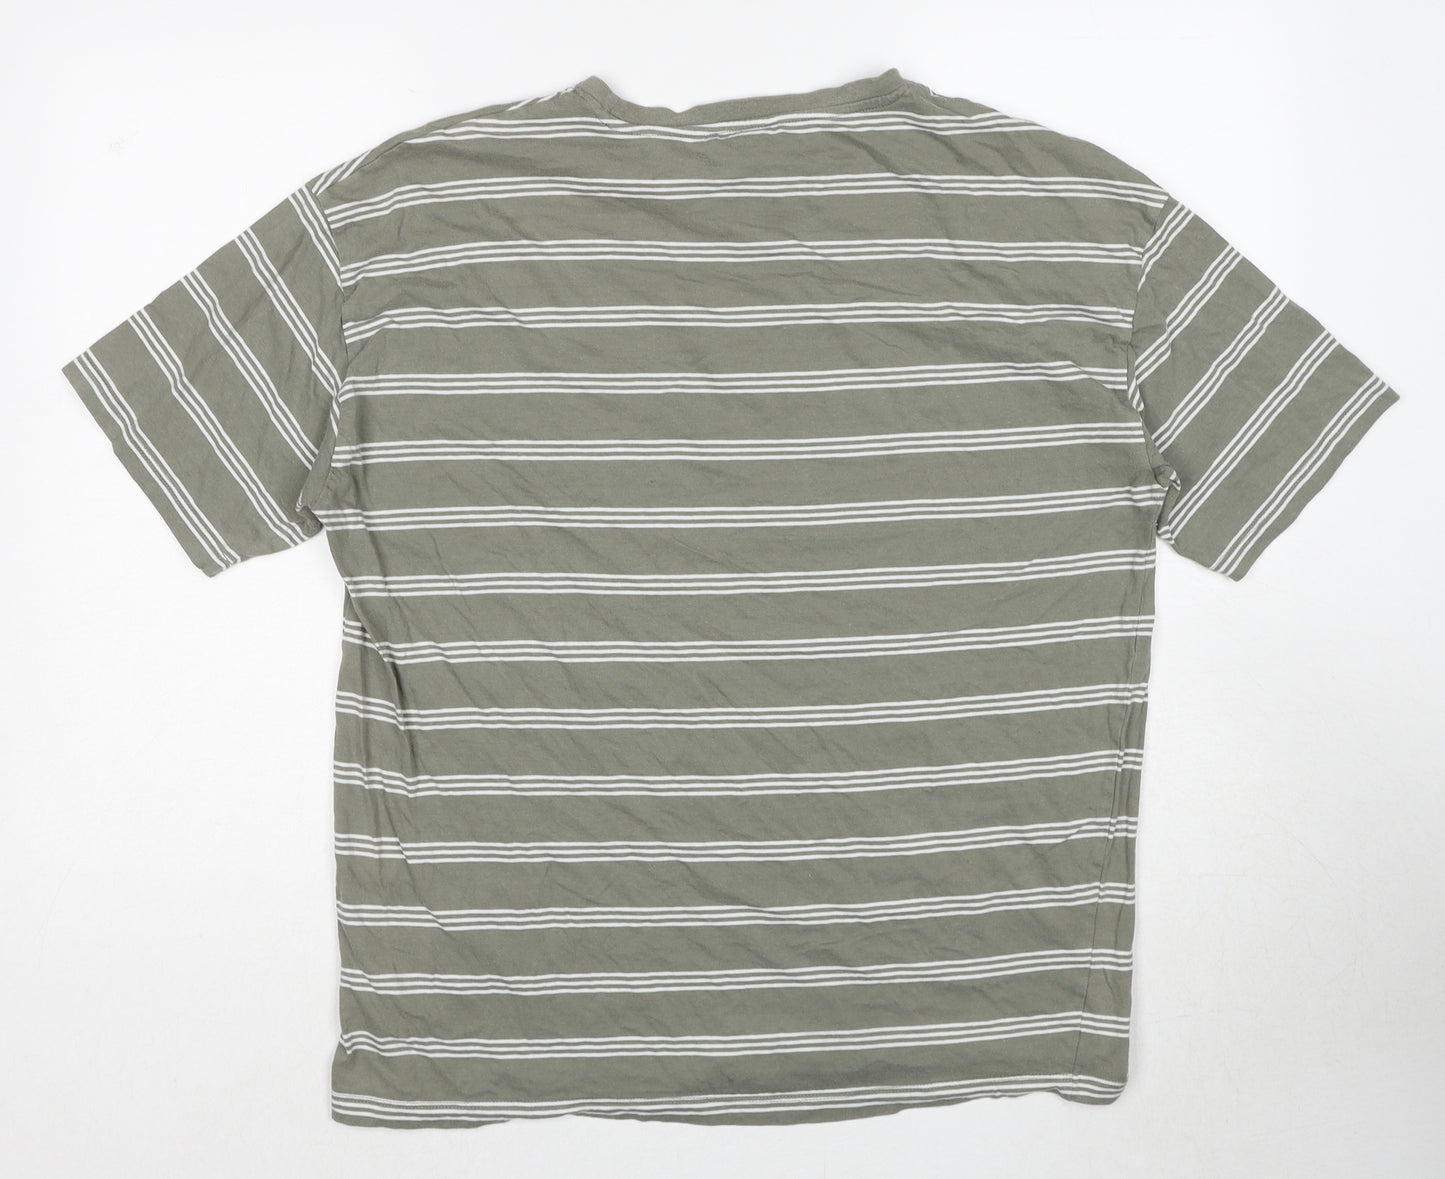 New Look Mens Green Striped Polyester T-Shirt Size M Round Neck